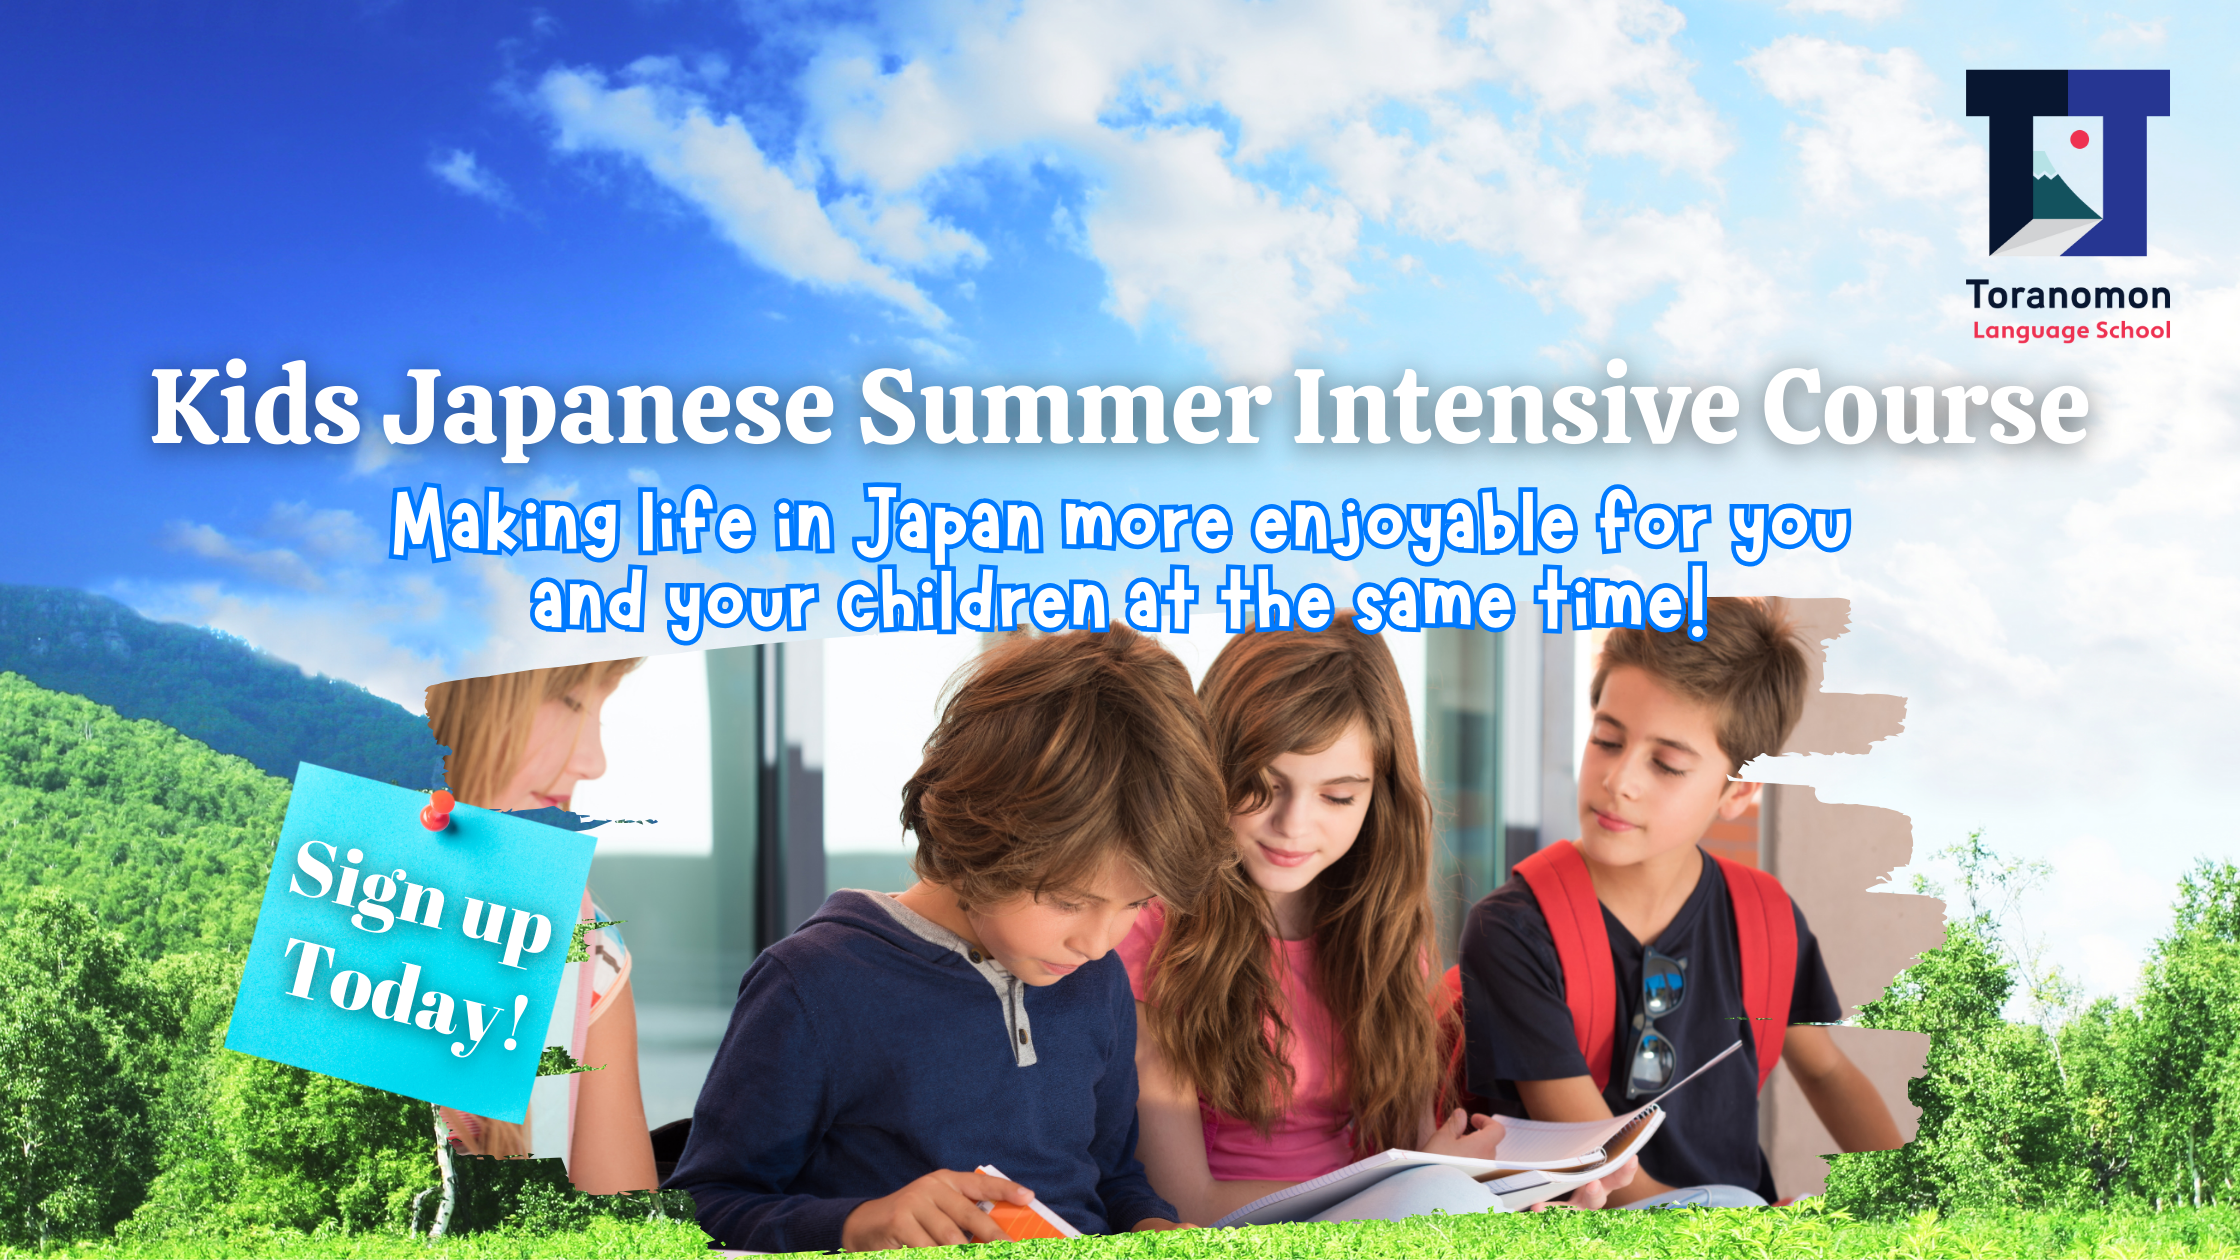 🍉 Kids Japanese Summer Intensive Course, Making life in Japan more enjoyable for you and your children at the same time!🎐